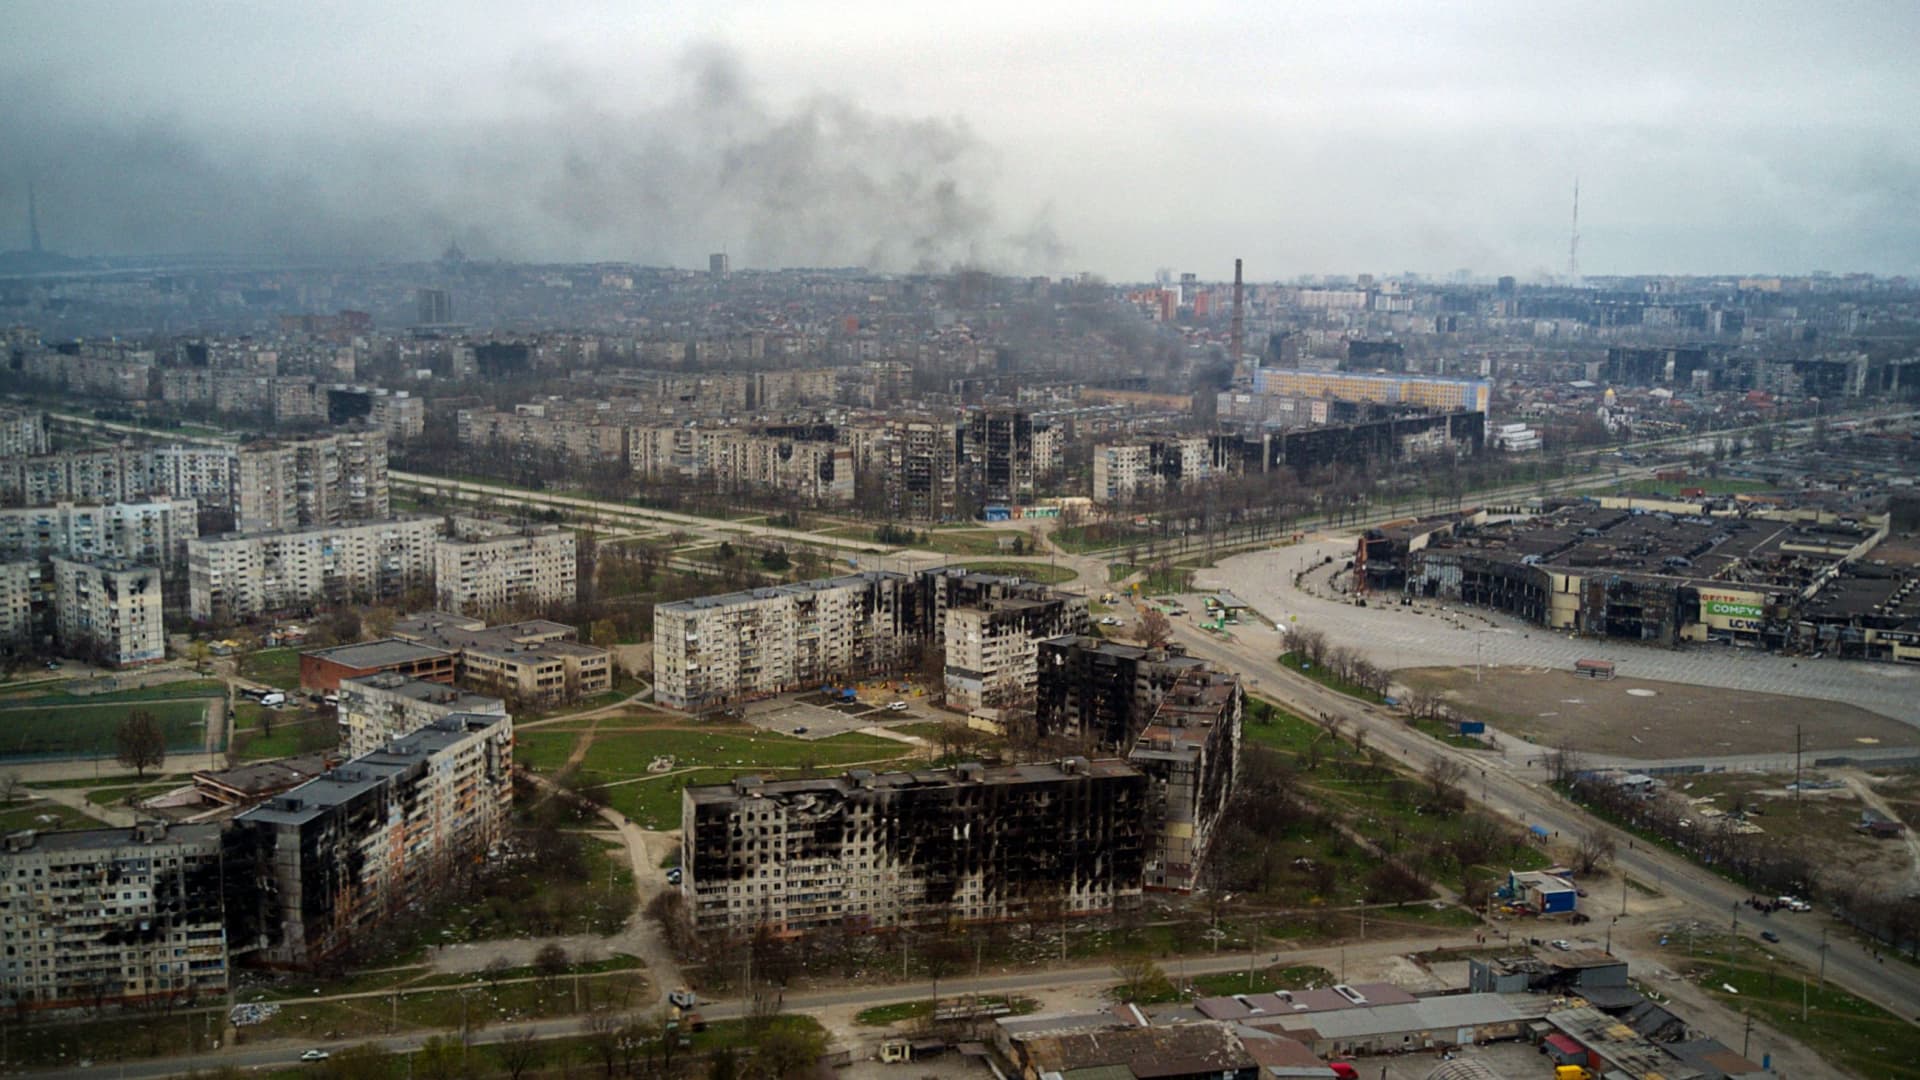 An aerial view taken on April 12, 2022, shows the city of Mariupol, during Russia's military invasion launched on Ukraine.